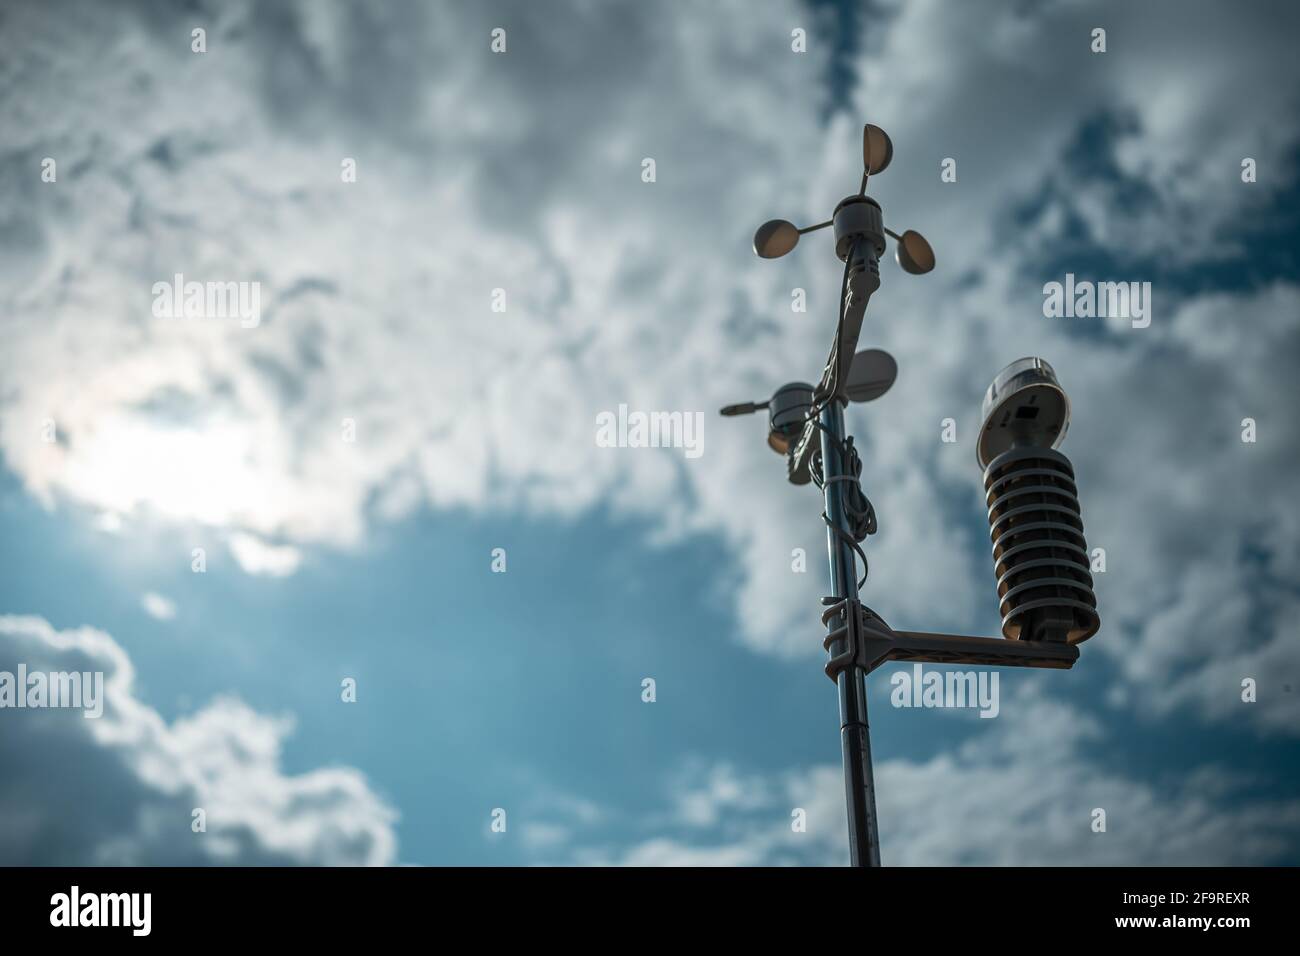 modern anemometer or weather wind vane for measuring meteorology conditions Stock Photo